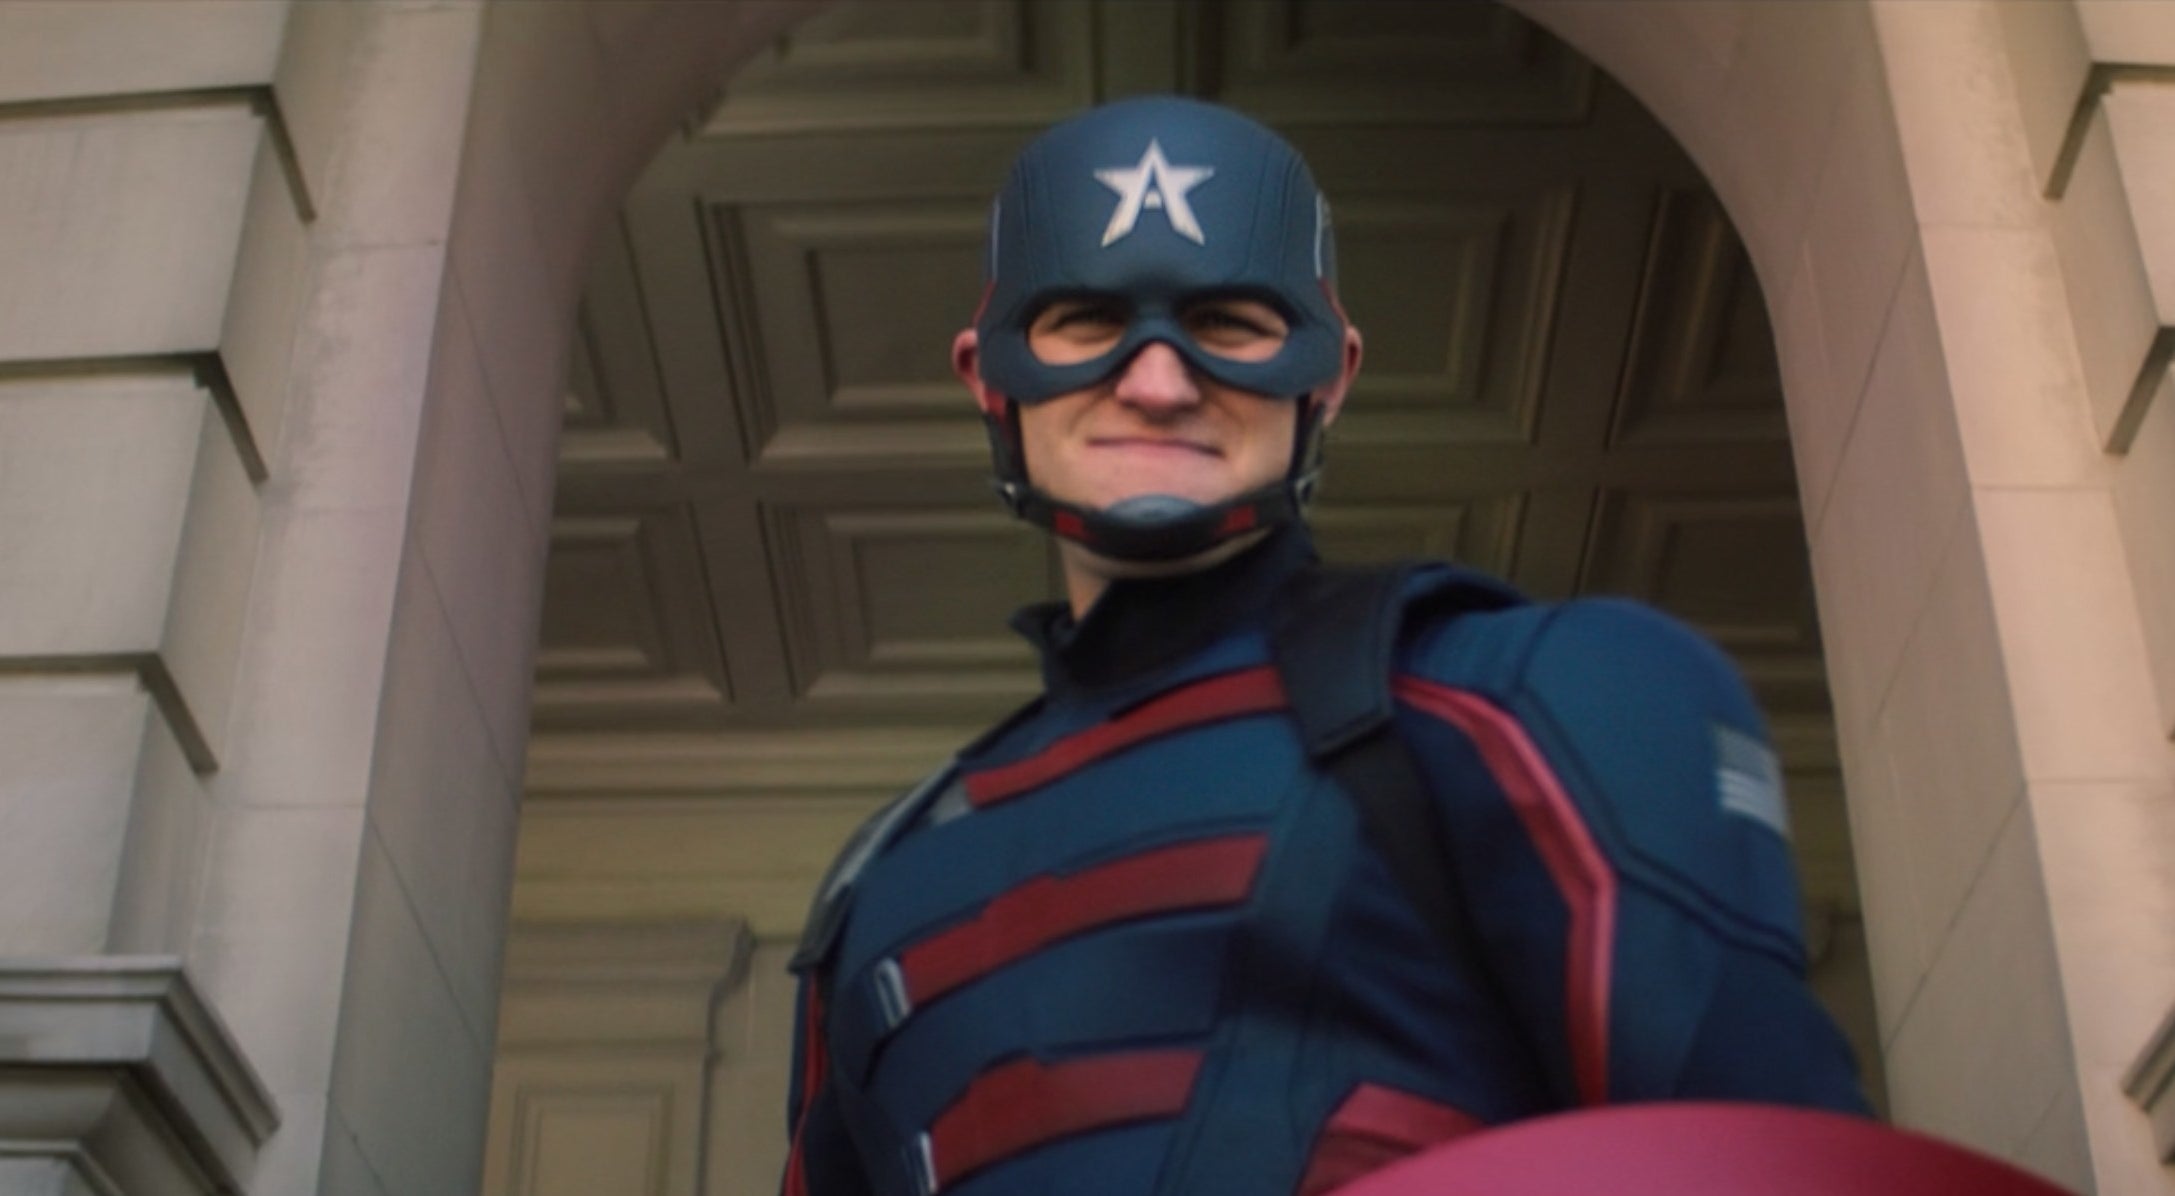 The US agent as the new Captain America